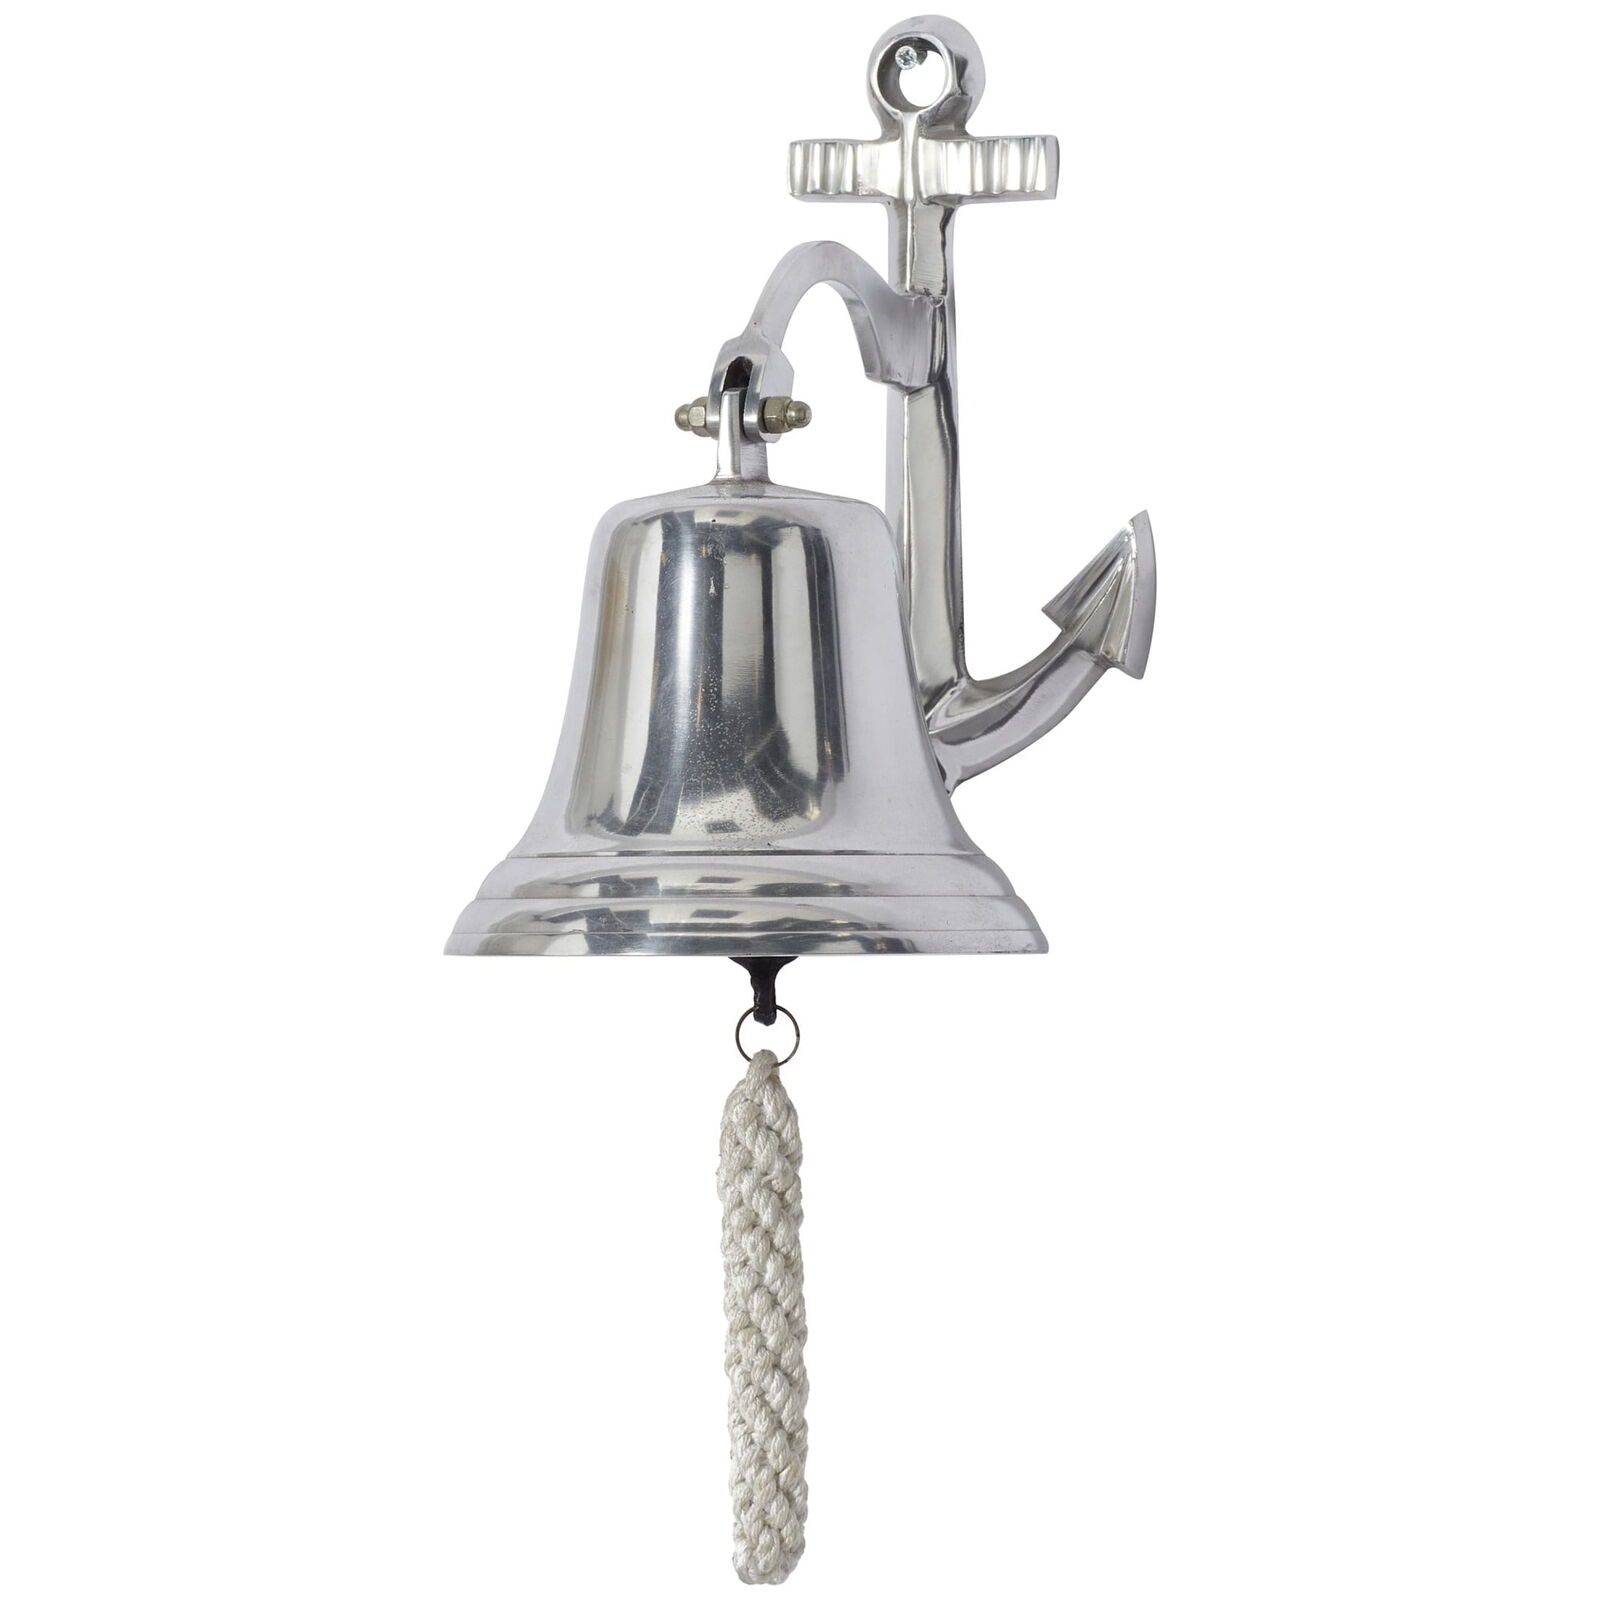 Silver Aluminum Bell Wall Decor with Anchor Backing